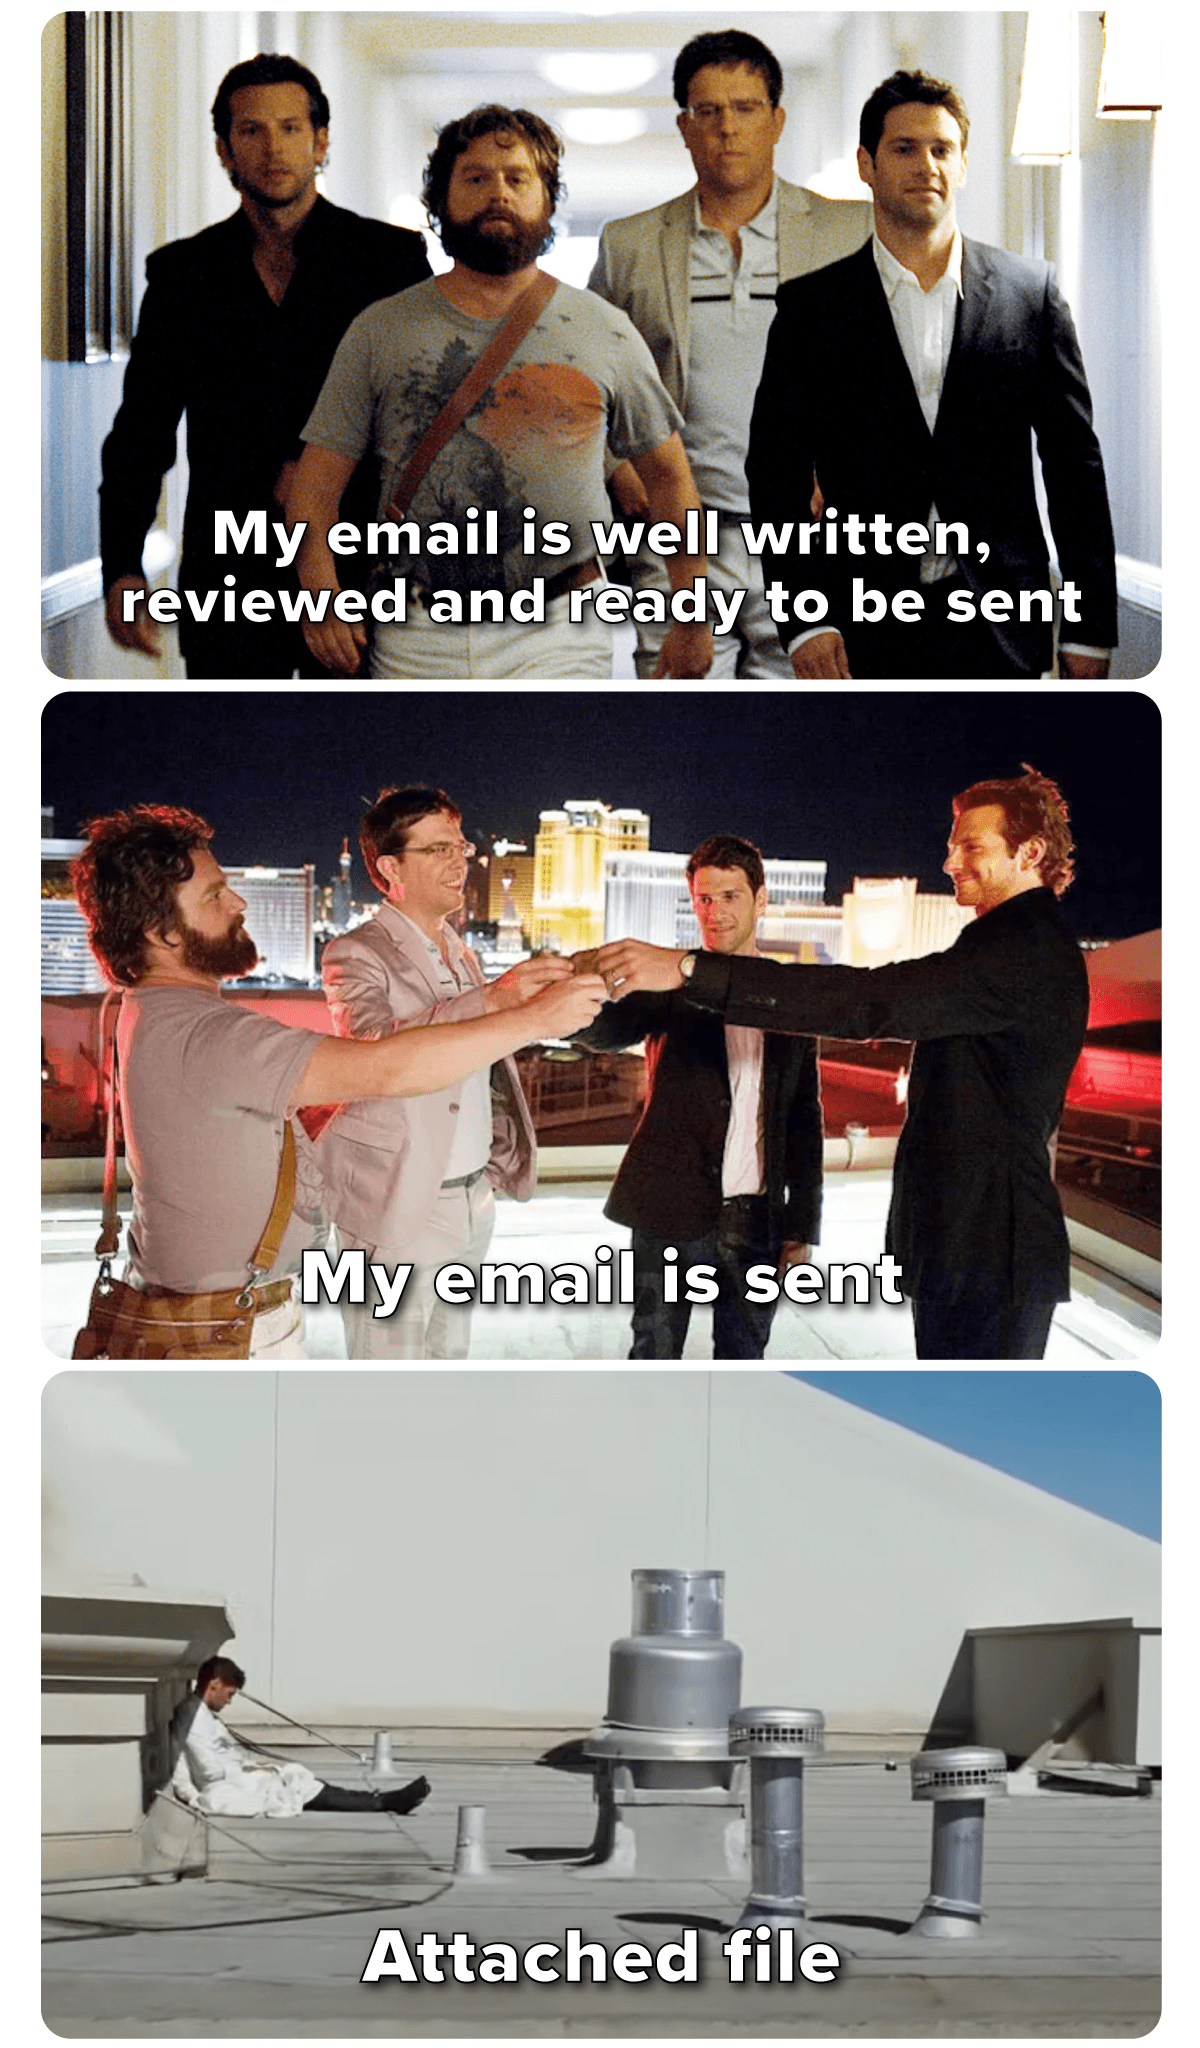 Meme About Forgetting to Attach a File to an Email